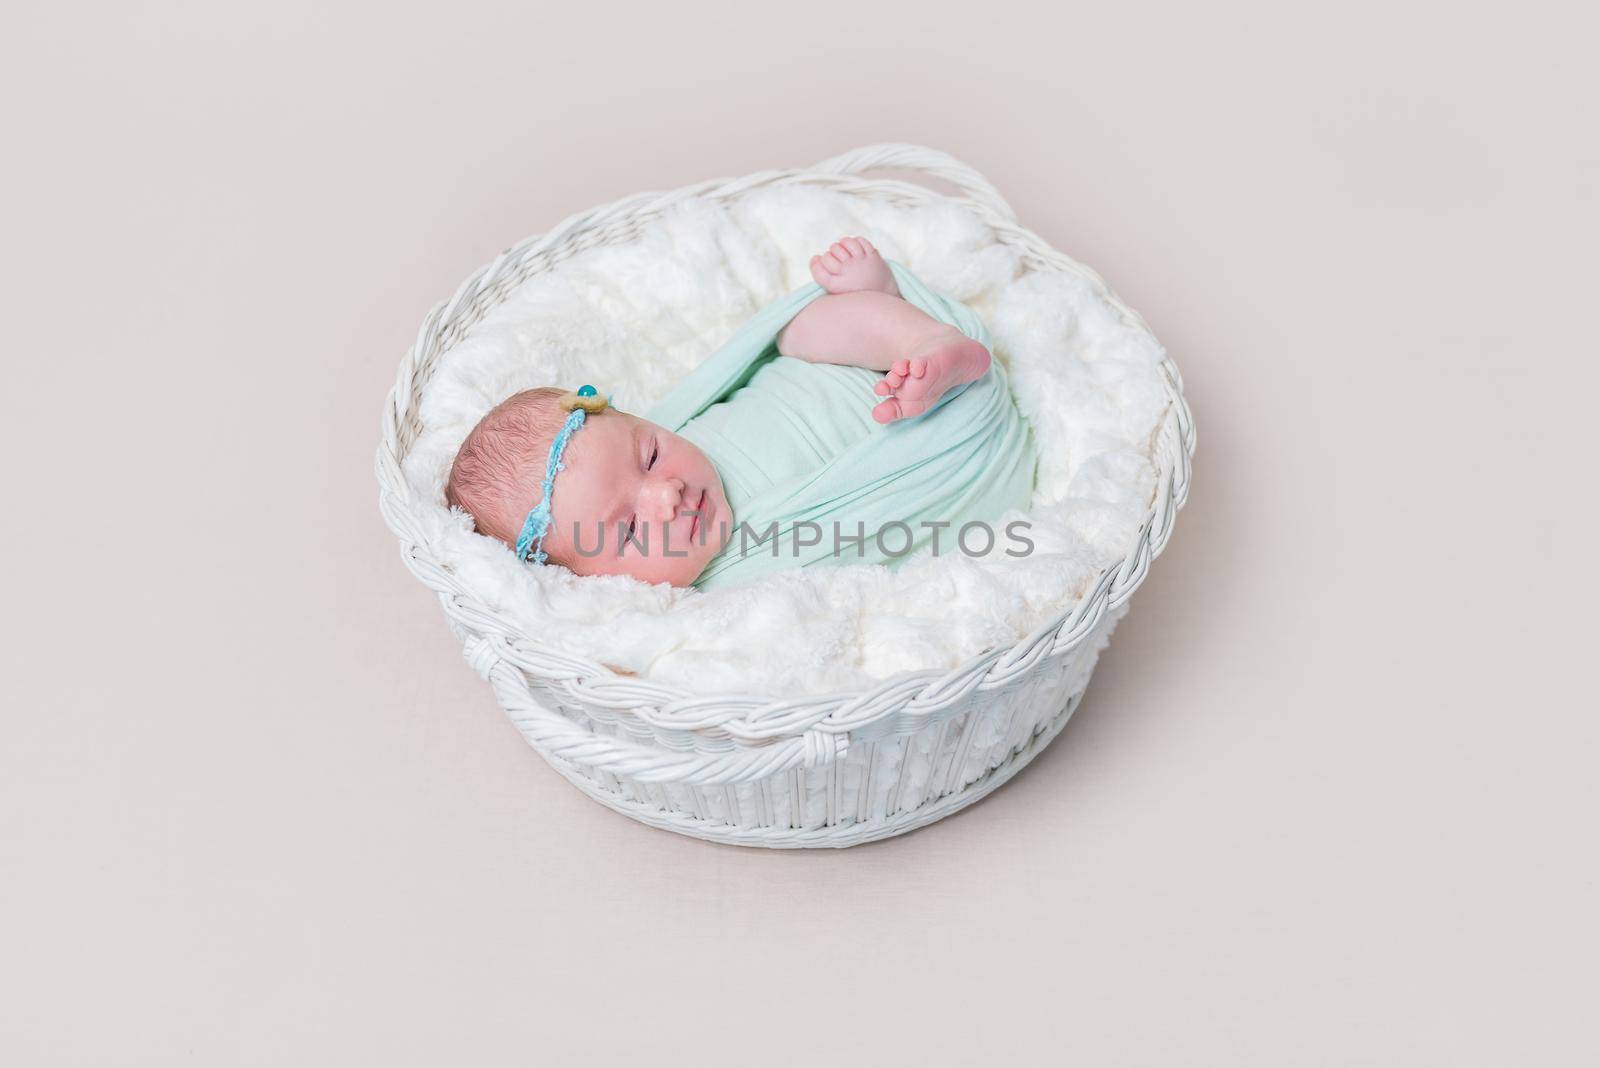 Adorable swaddled baby with legs moving, lying in kids basket, wearing headband